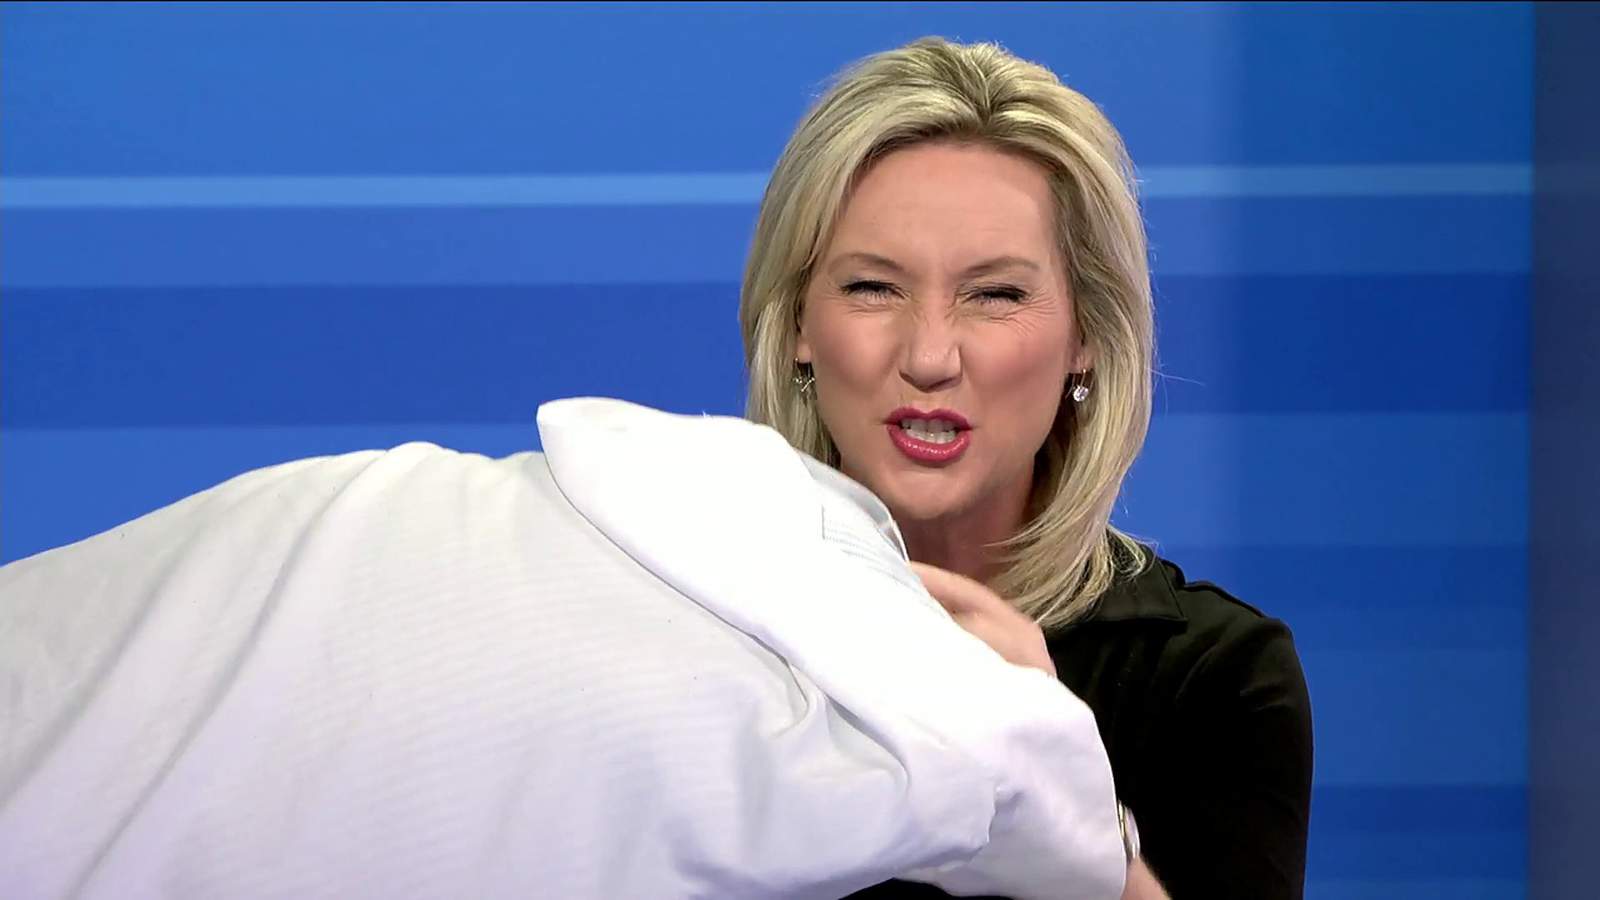 Consumer Reports offers pillow care tips